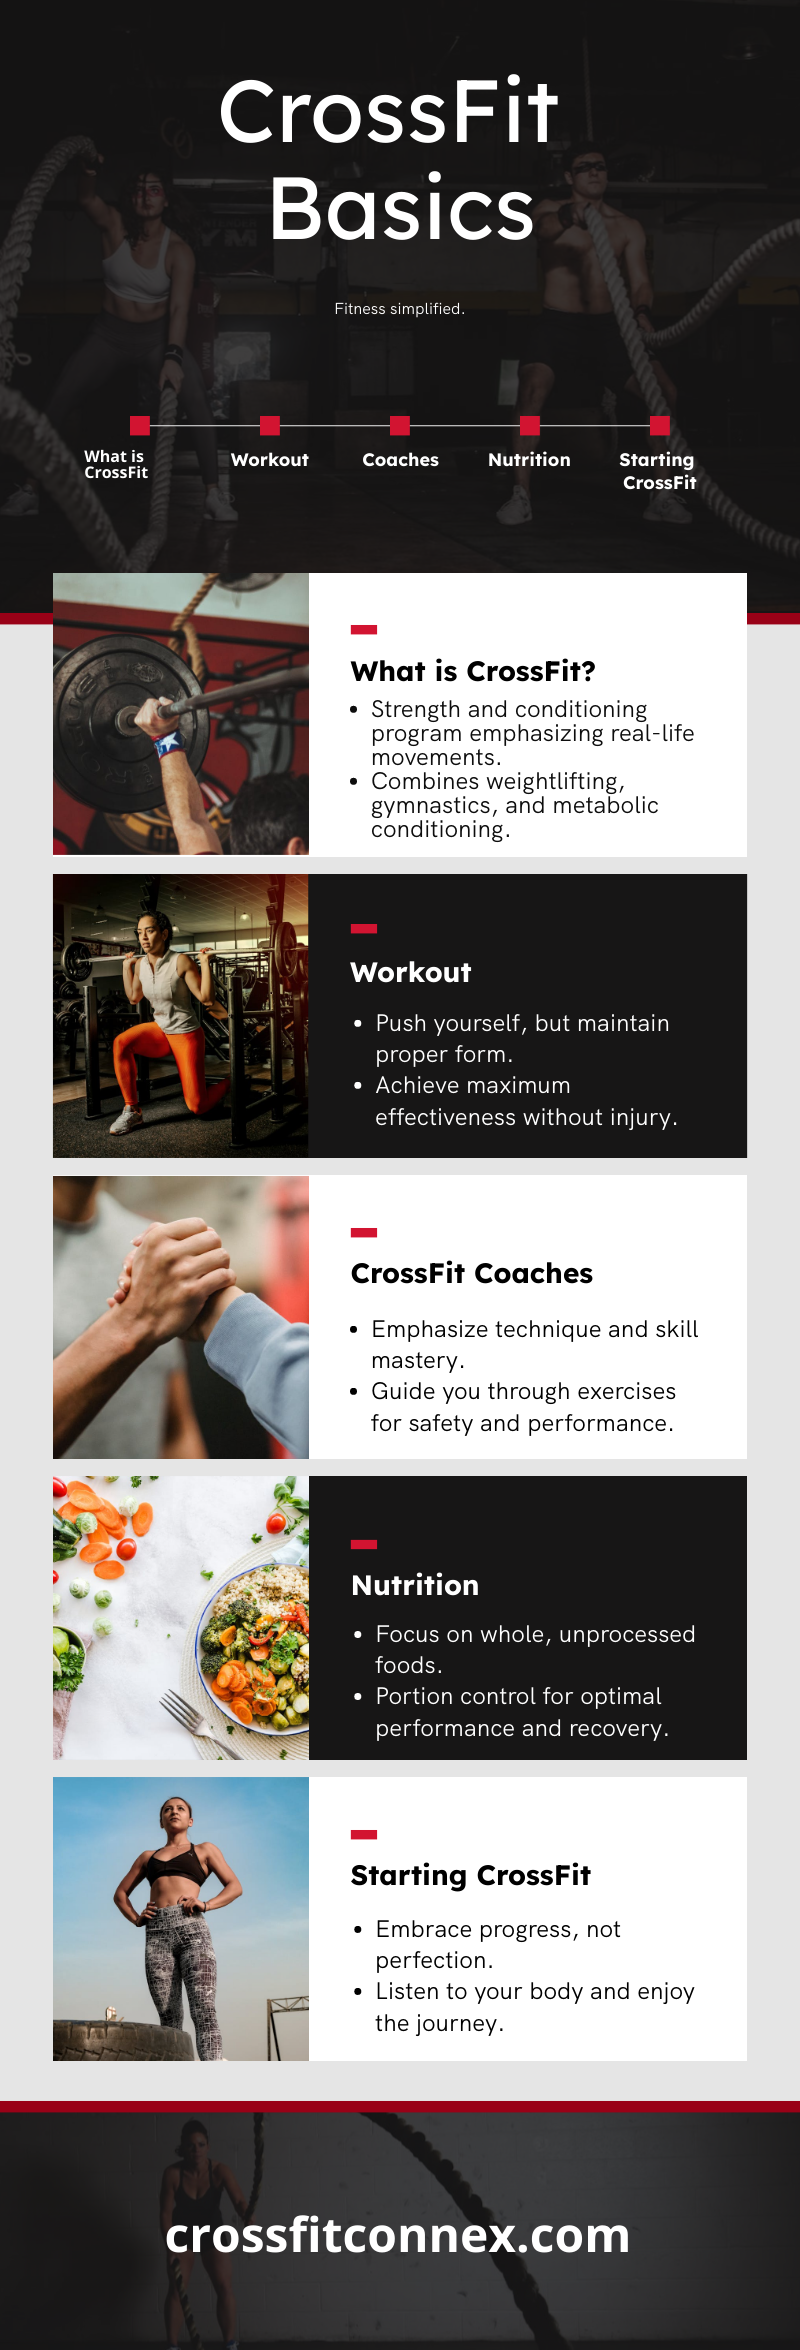 Infographic About Cross Fit Basics for Beginners